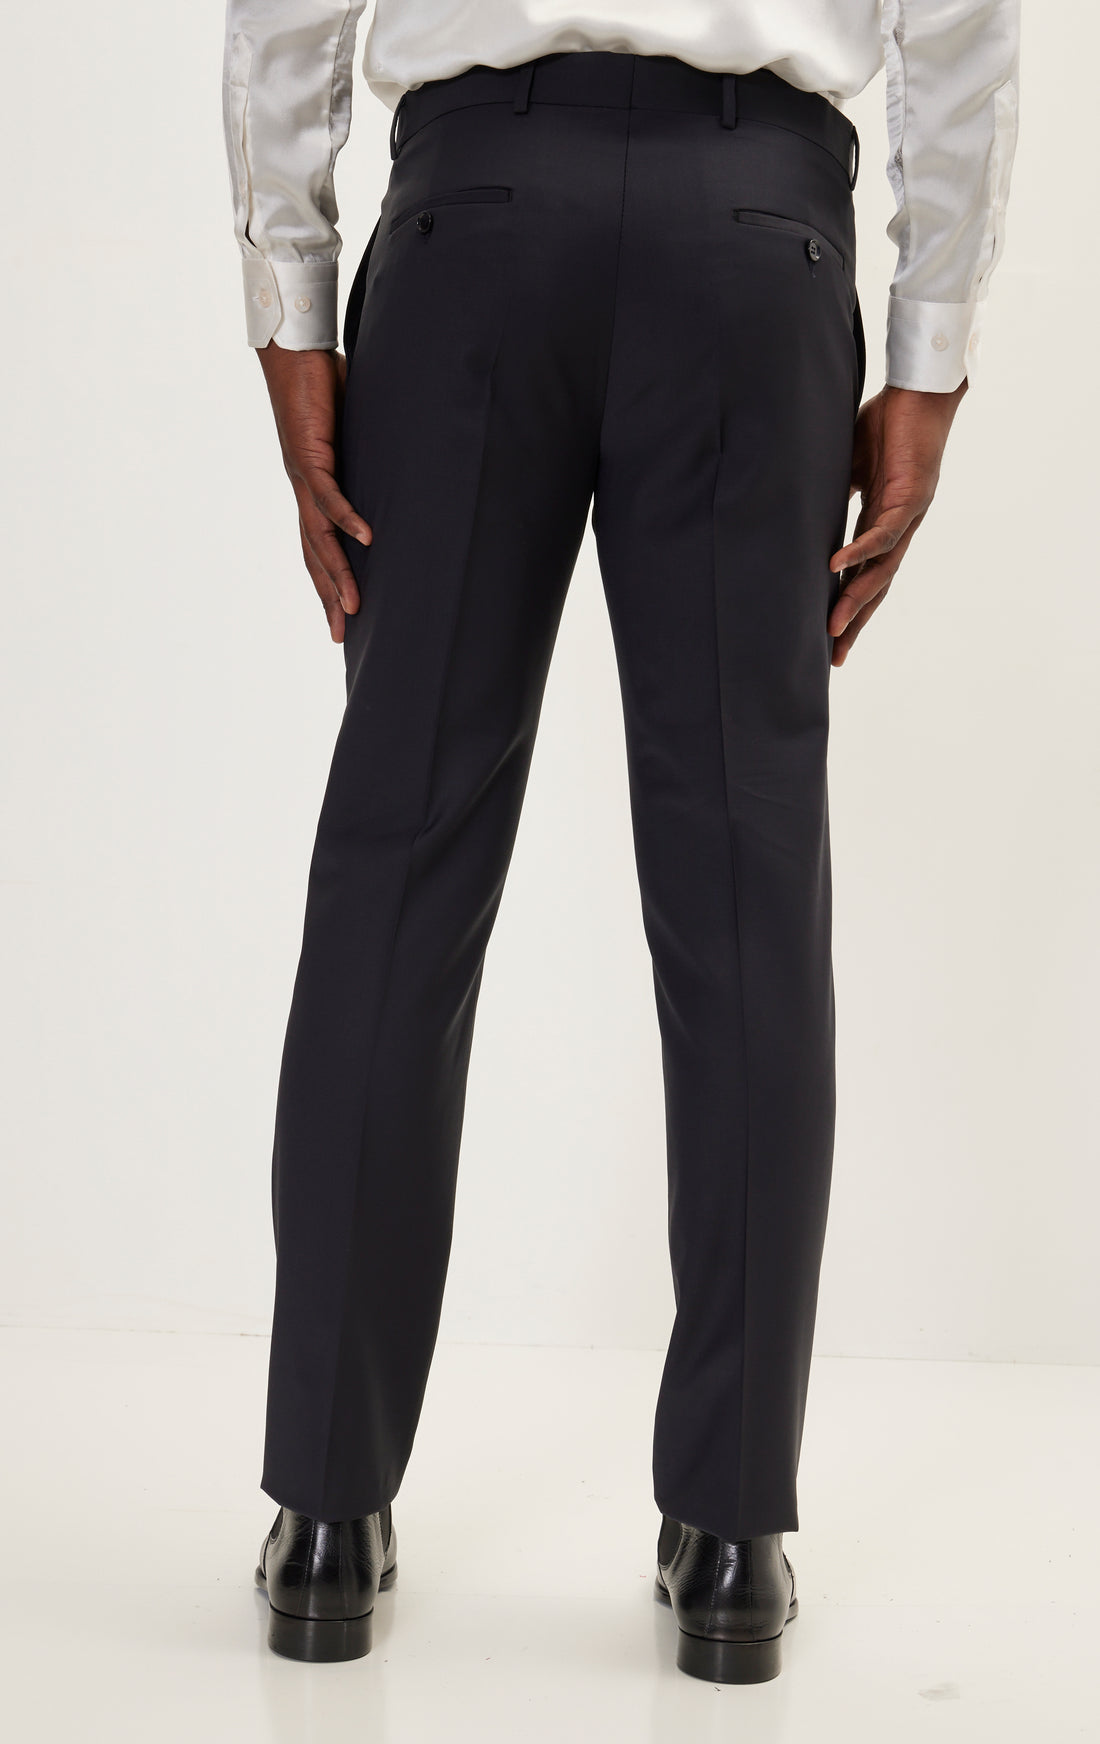 N° R206 SUPER 120S MERINO WOOL DOUBLE BREASTED SUIT - CARBON BLACK